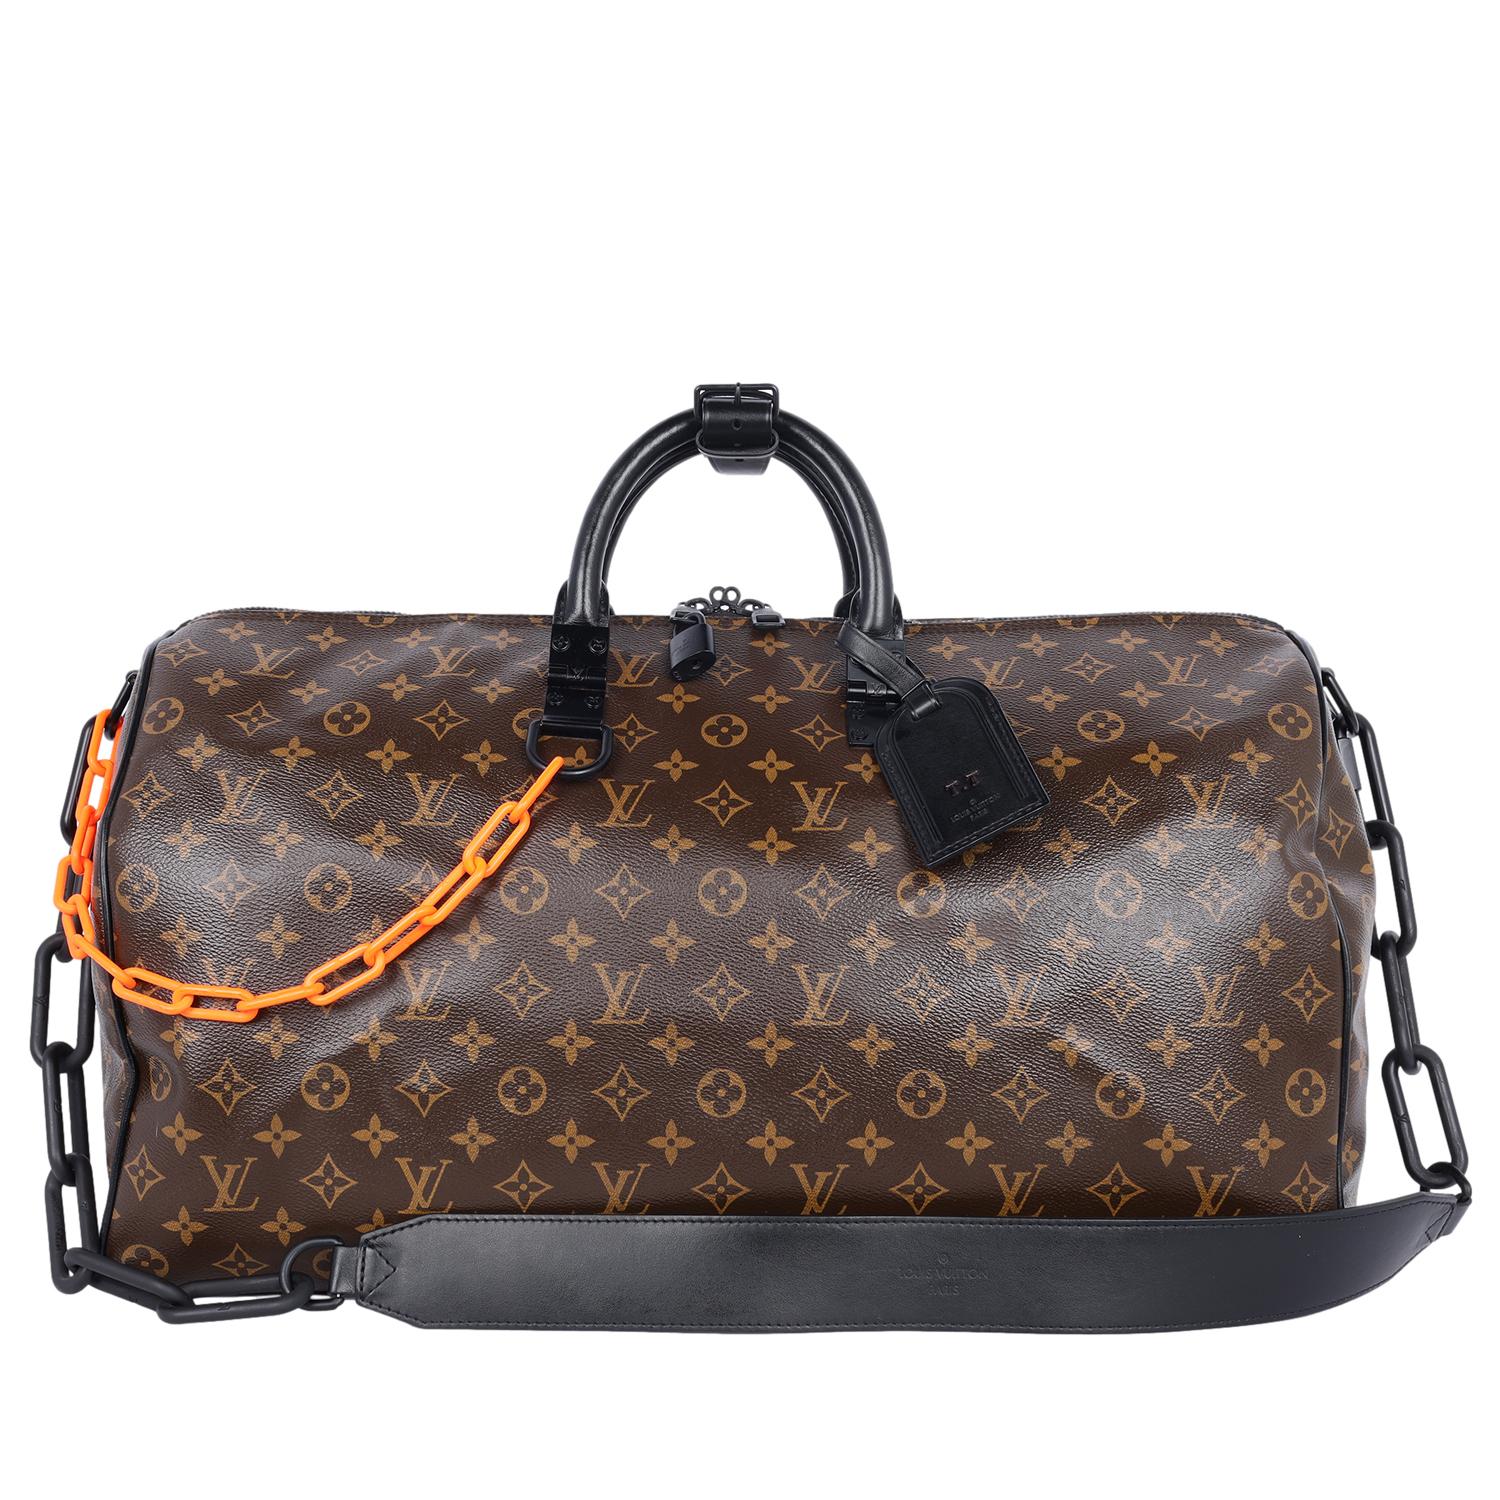 Authentic, pre-loved Louis Vuitton Virgil Abloh Monogram Chain Keepall Bandouliere 50.  The Louis Vuitton Keepall 50 features the classic monogram print in a coated calfskin canvas with matte black detailing and piping. Bright orange and black